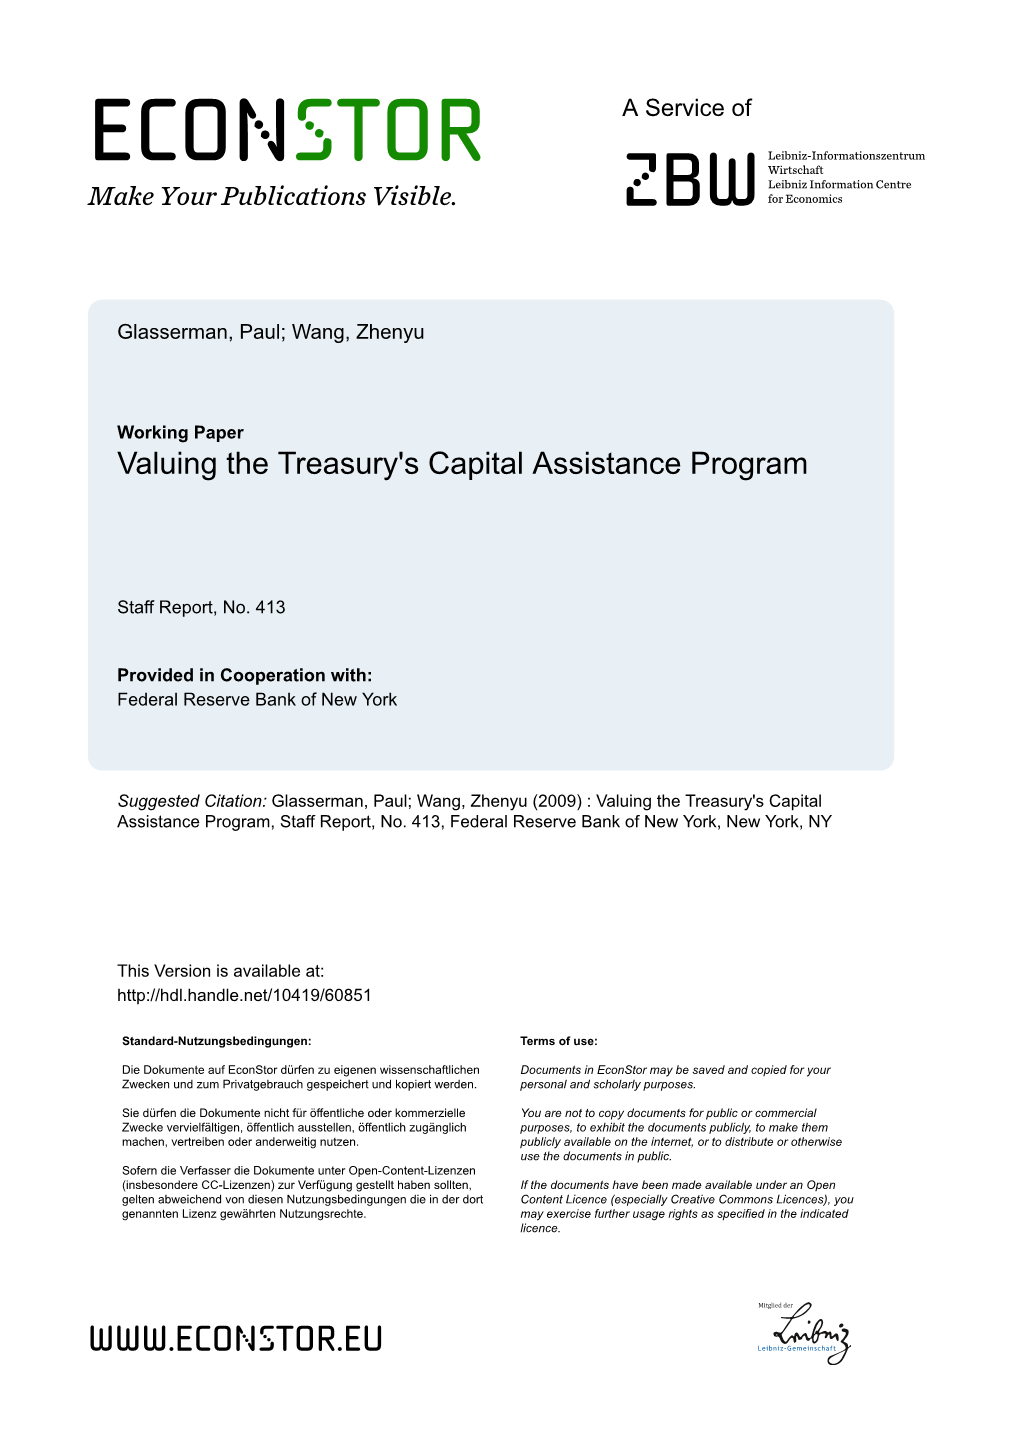 Valuing the Treasury's Capital Assistance Program